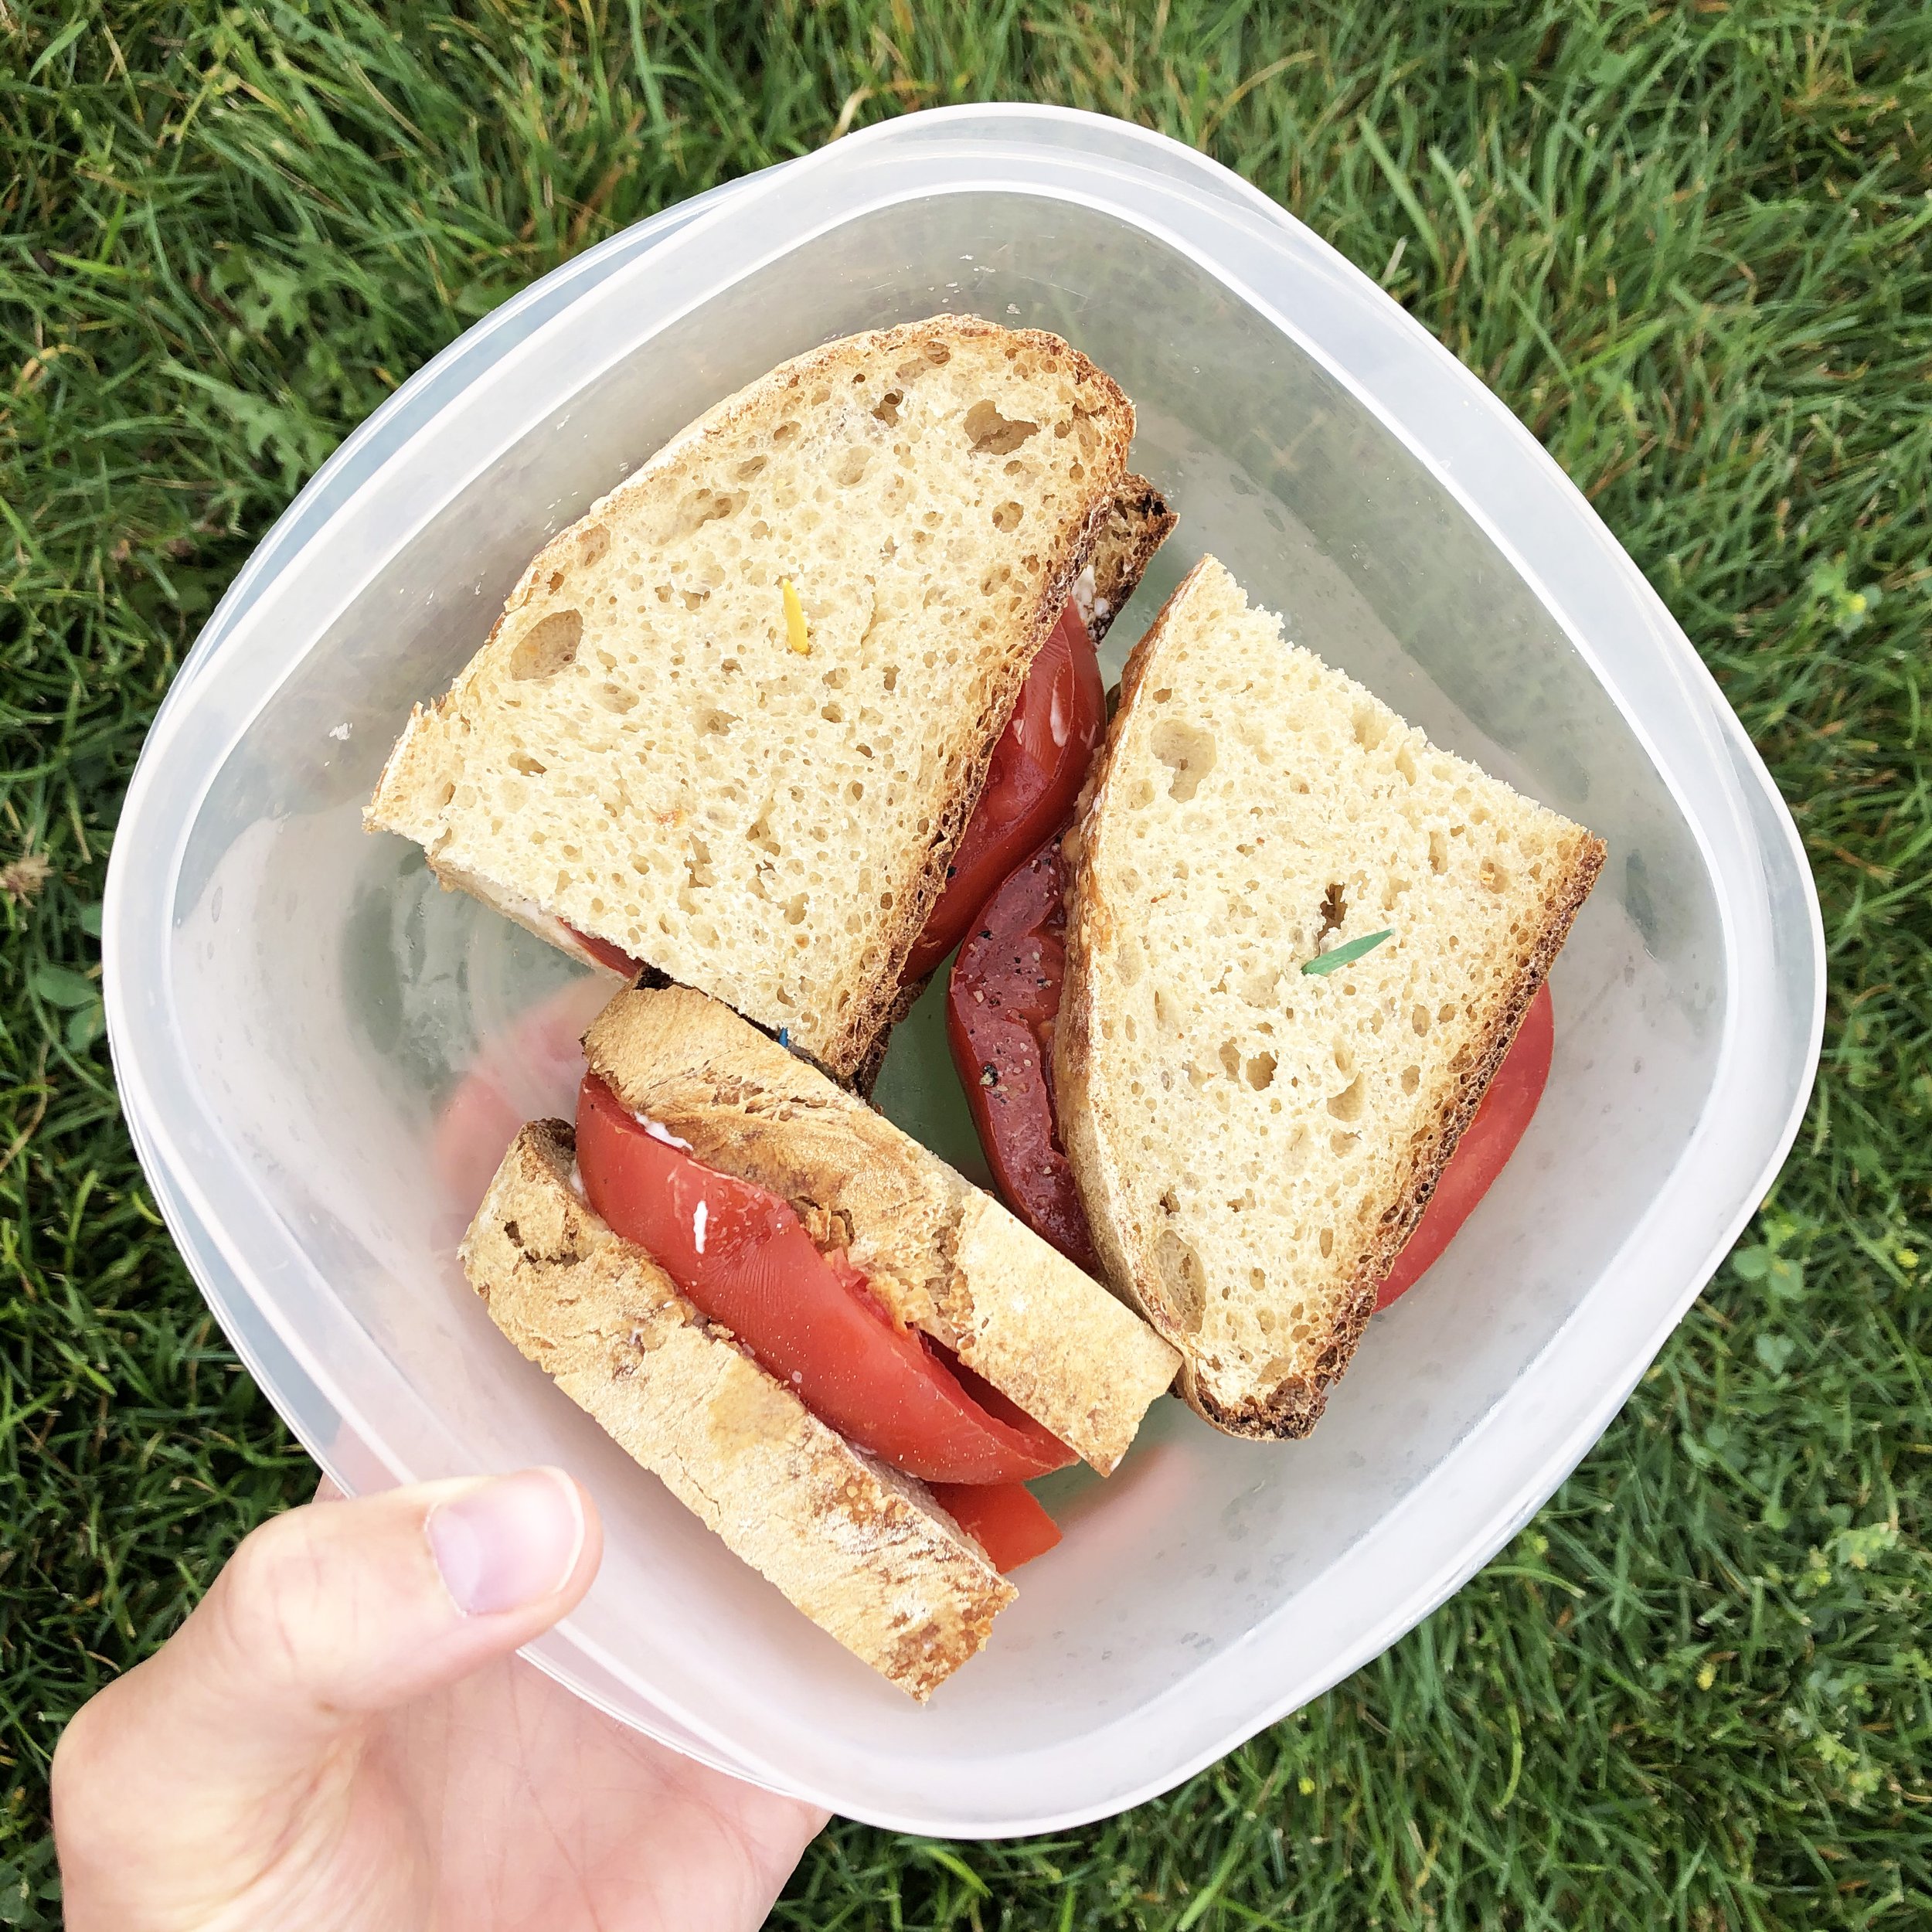 Example of seasonal eating: tomato sandwiches in the summer